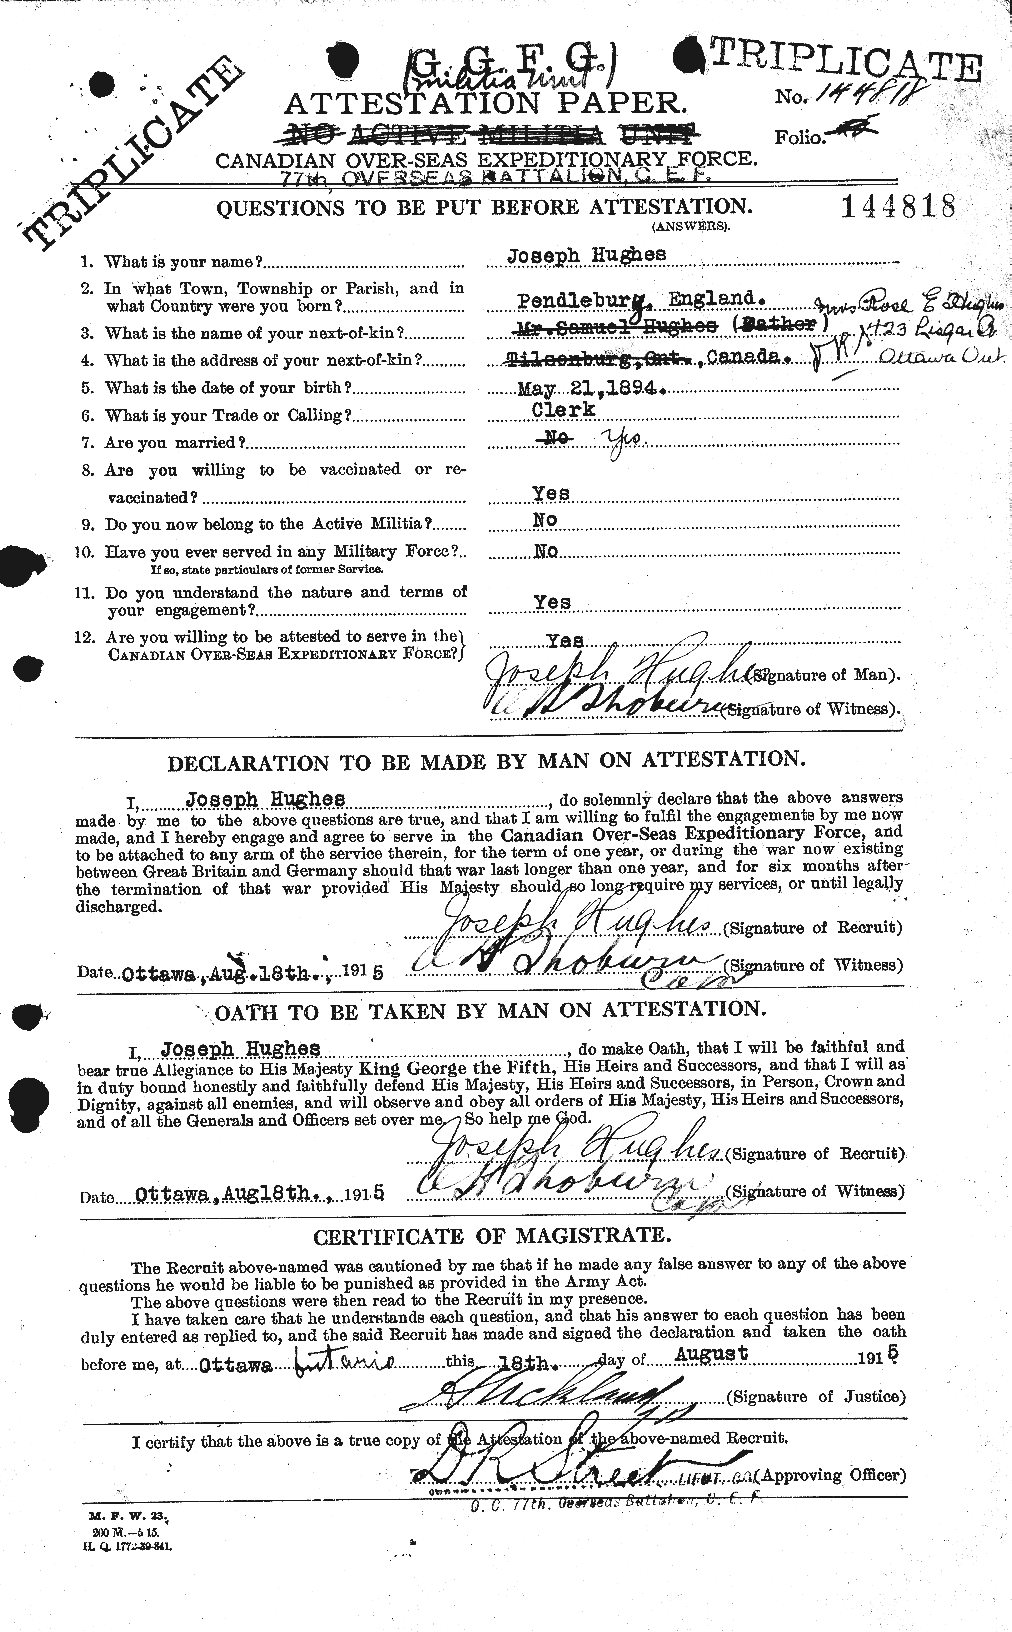 Personnel Records of the First World War - CEF 404069a